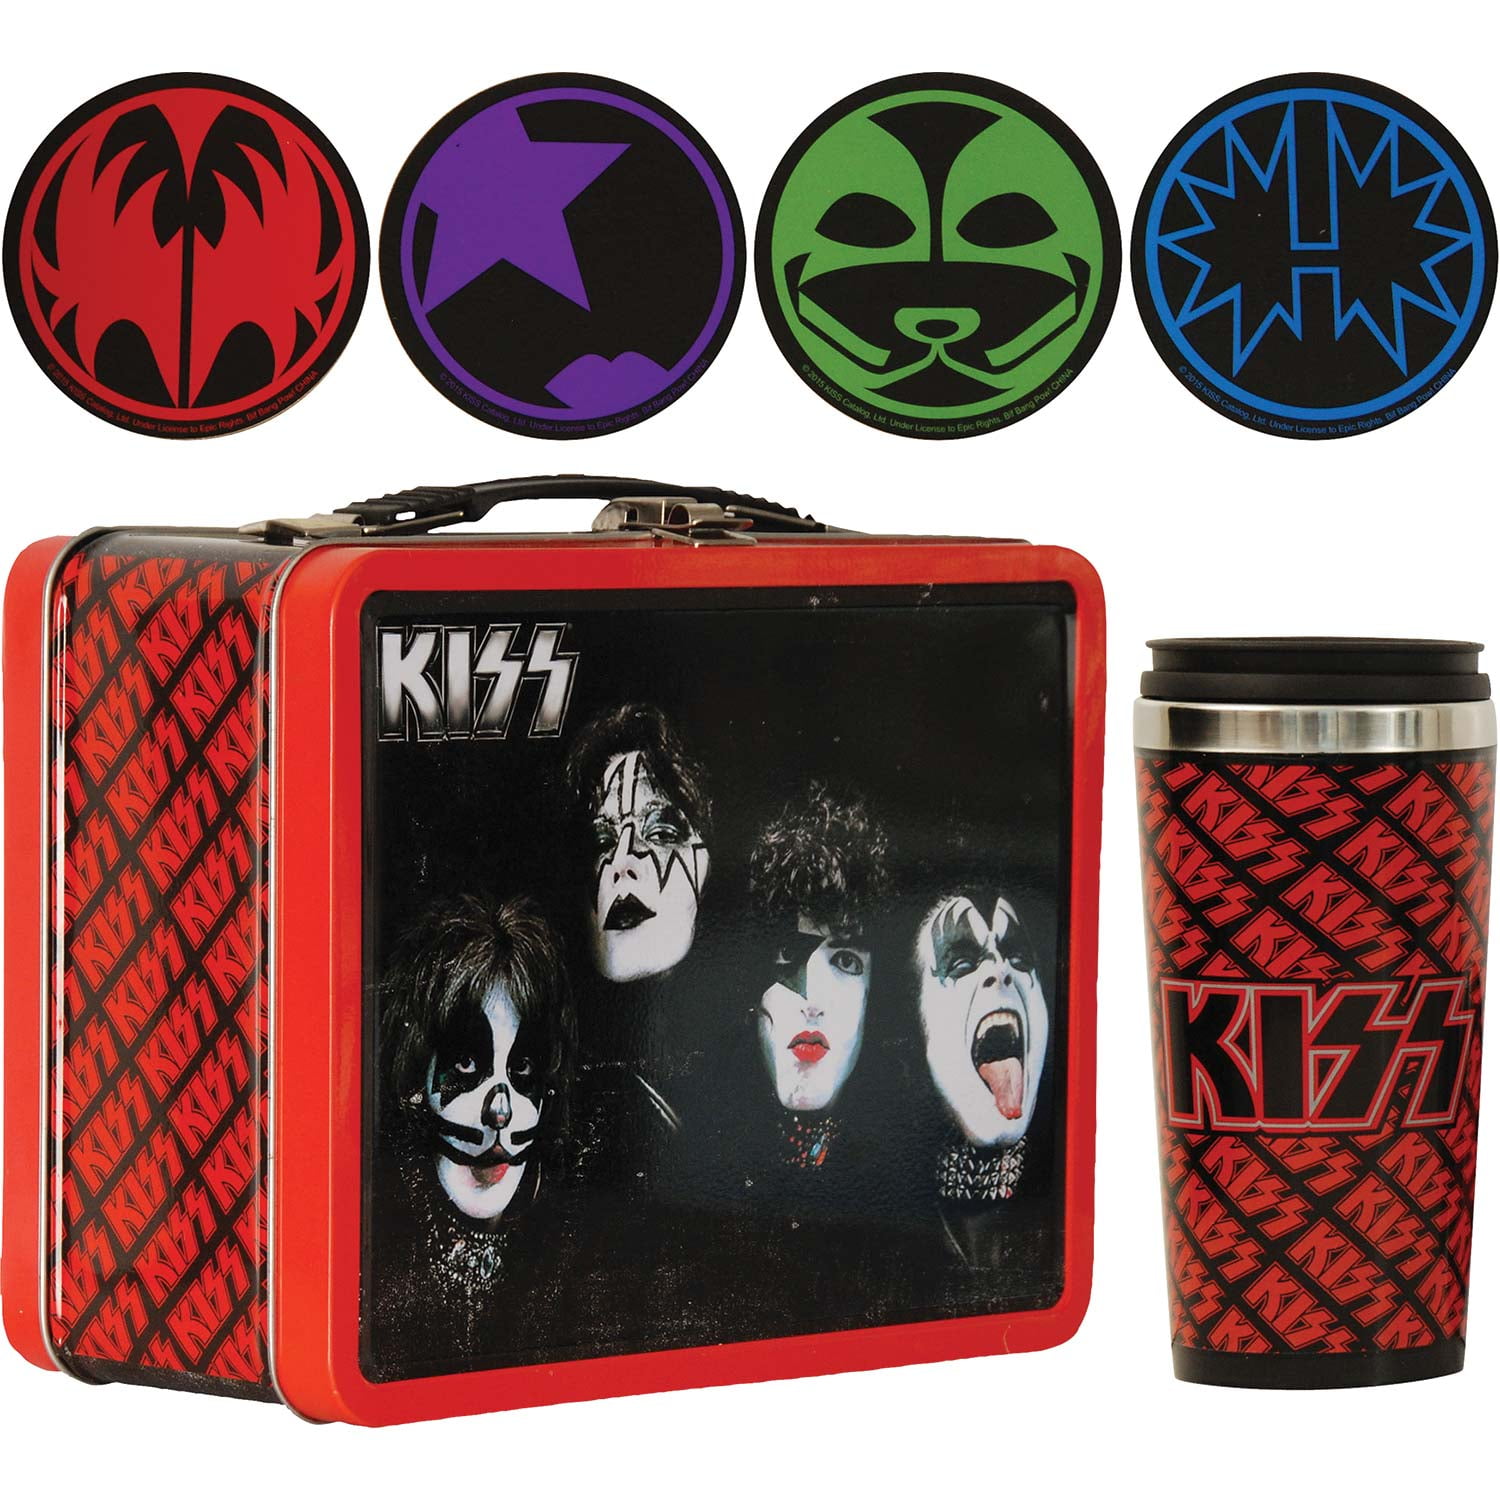 1977 Kiss Lunch Box Lunch Box Thermos Vintage Lunch Boxes Vlrengbr 